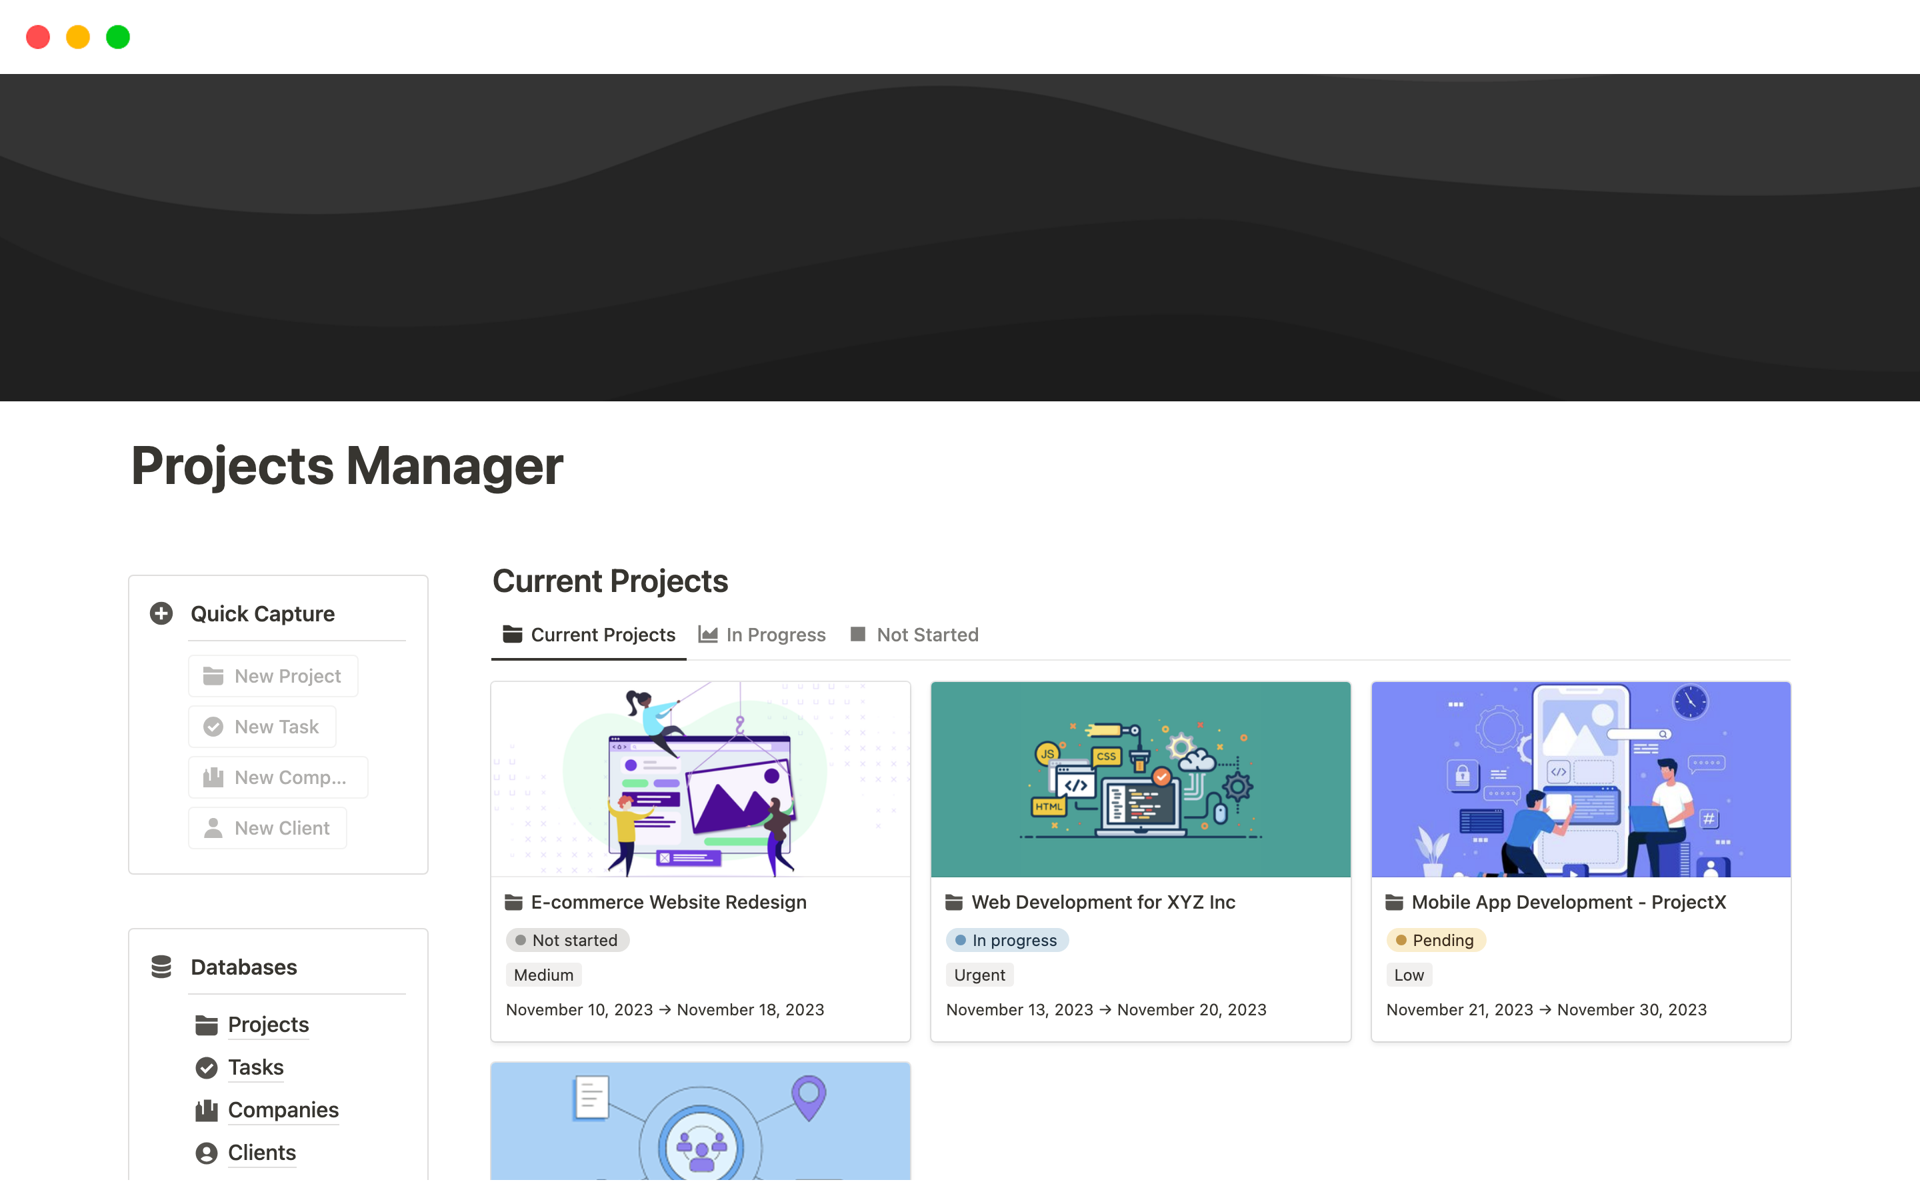 Get your projects on track with our easy 'Projects Manager' template for Notion, It's a game changer for teamwork and staying organized.